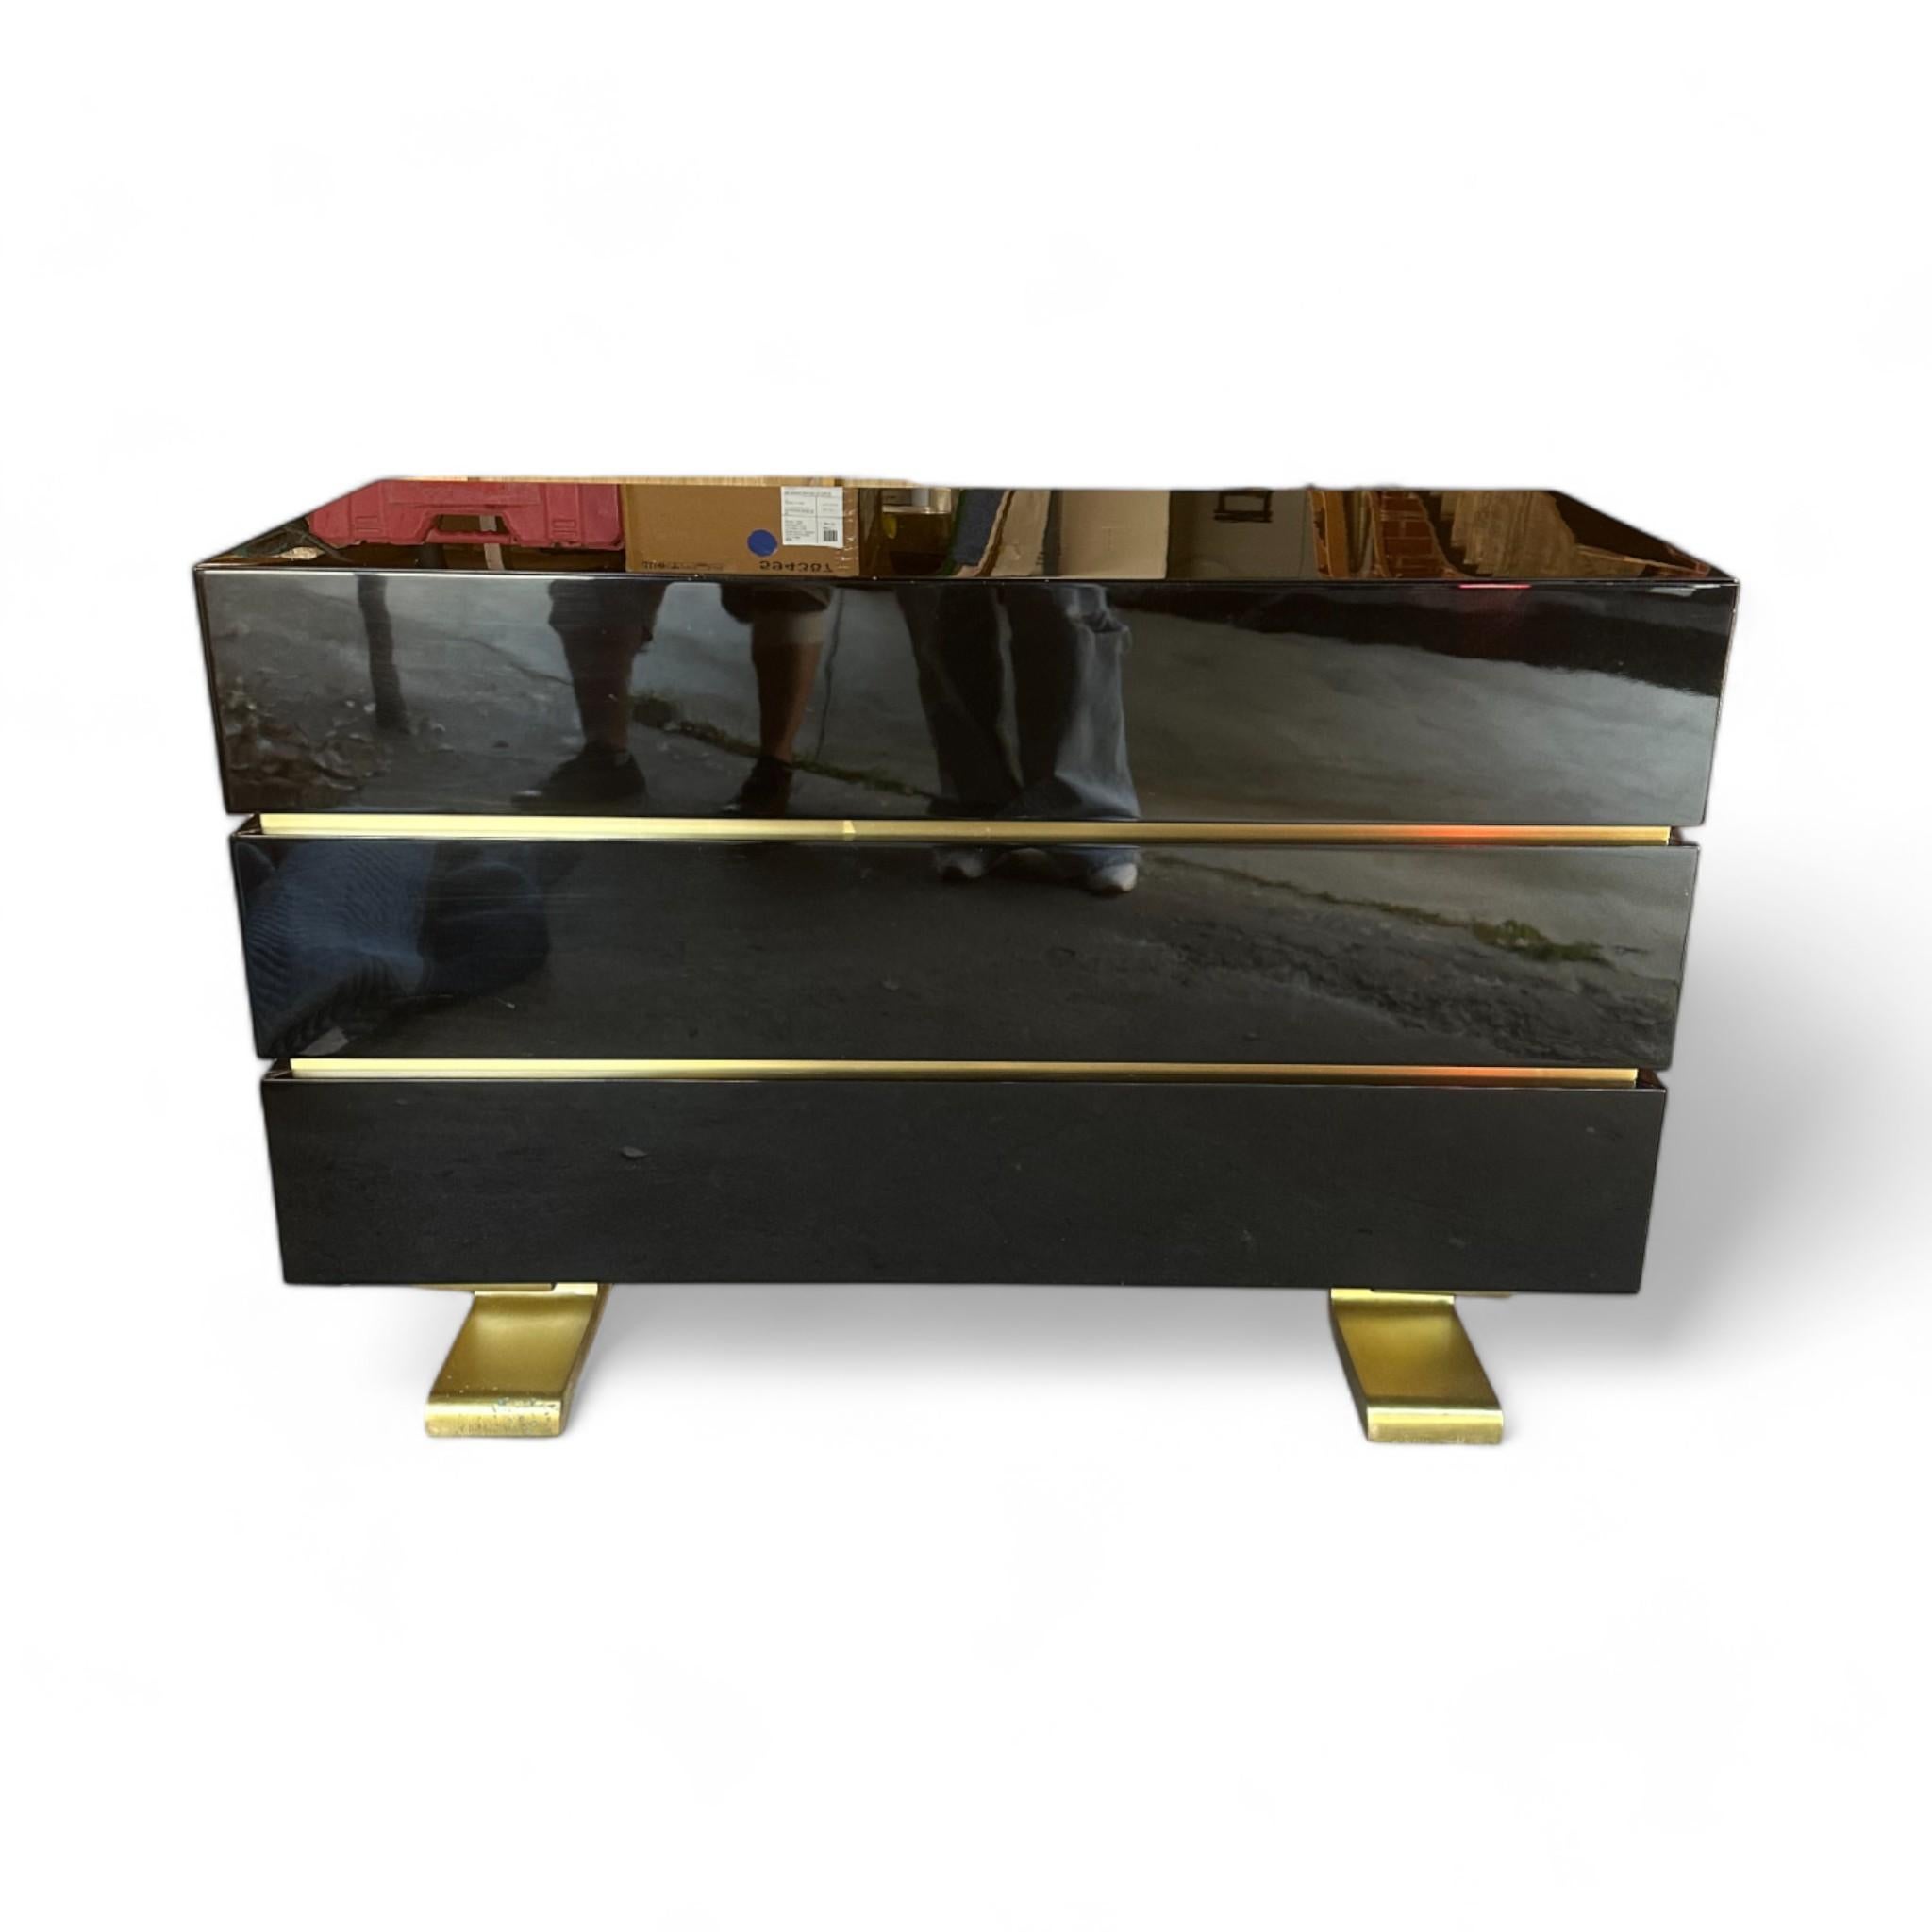 Jean De Merry Black Lacquer Credenza

Jean de Merry is a luxury furniture line of timeless, poetic and French deco-inspired pieces, thoughtfully designed and expertly handcrafted. 

Jean de Merry was established in 2001. A marriage of quality